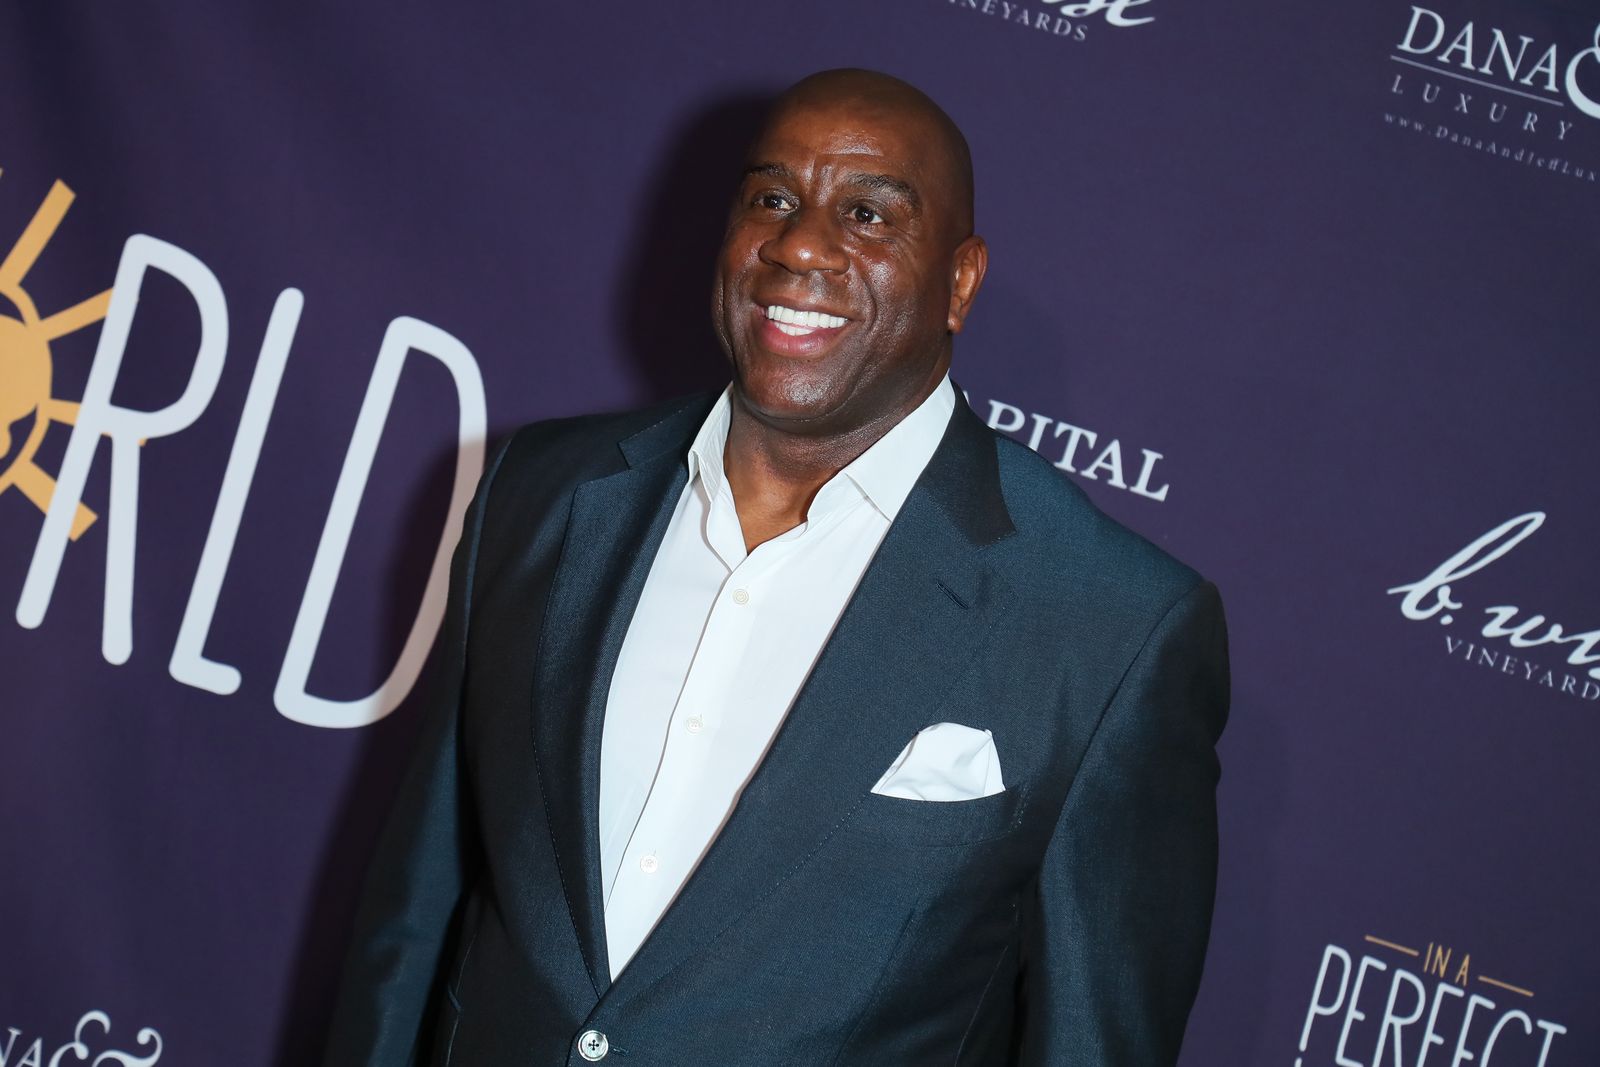 Earvin Magic Johnson at Manuela Testolini And Eric Bent Present An Evening Of Music, Art And Philanthropy on March 03, 2019 | Photo: Getty Images